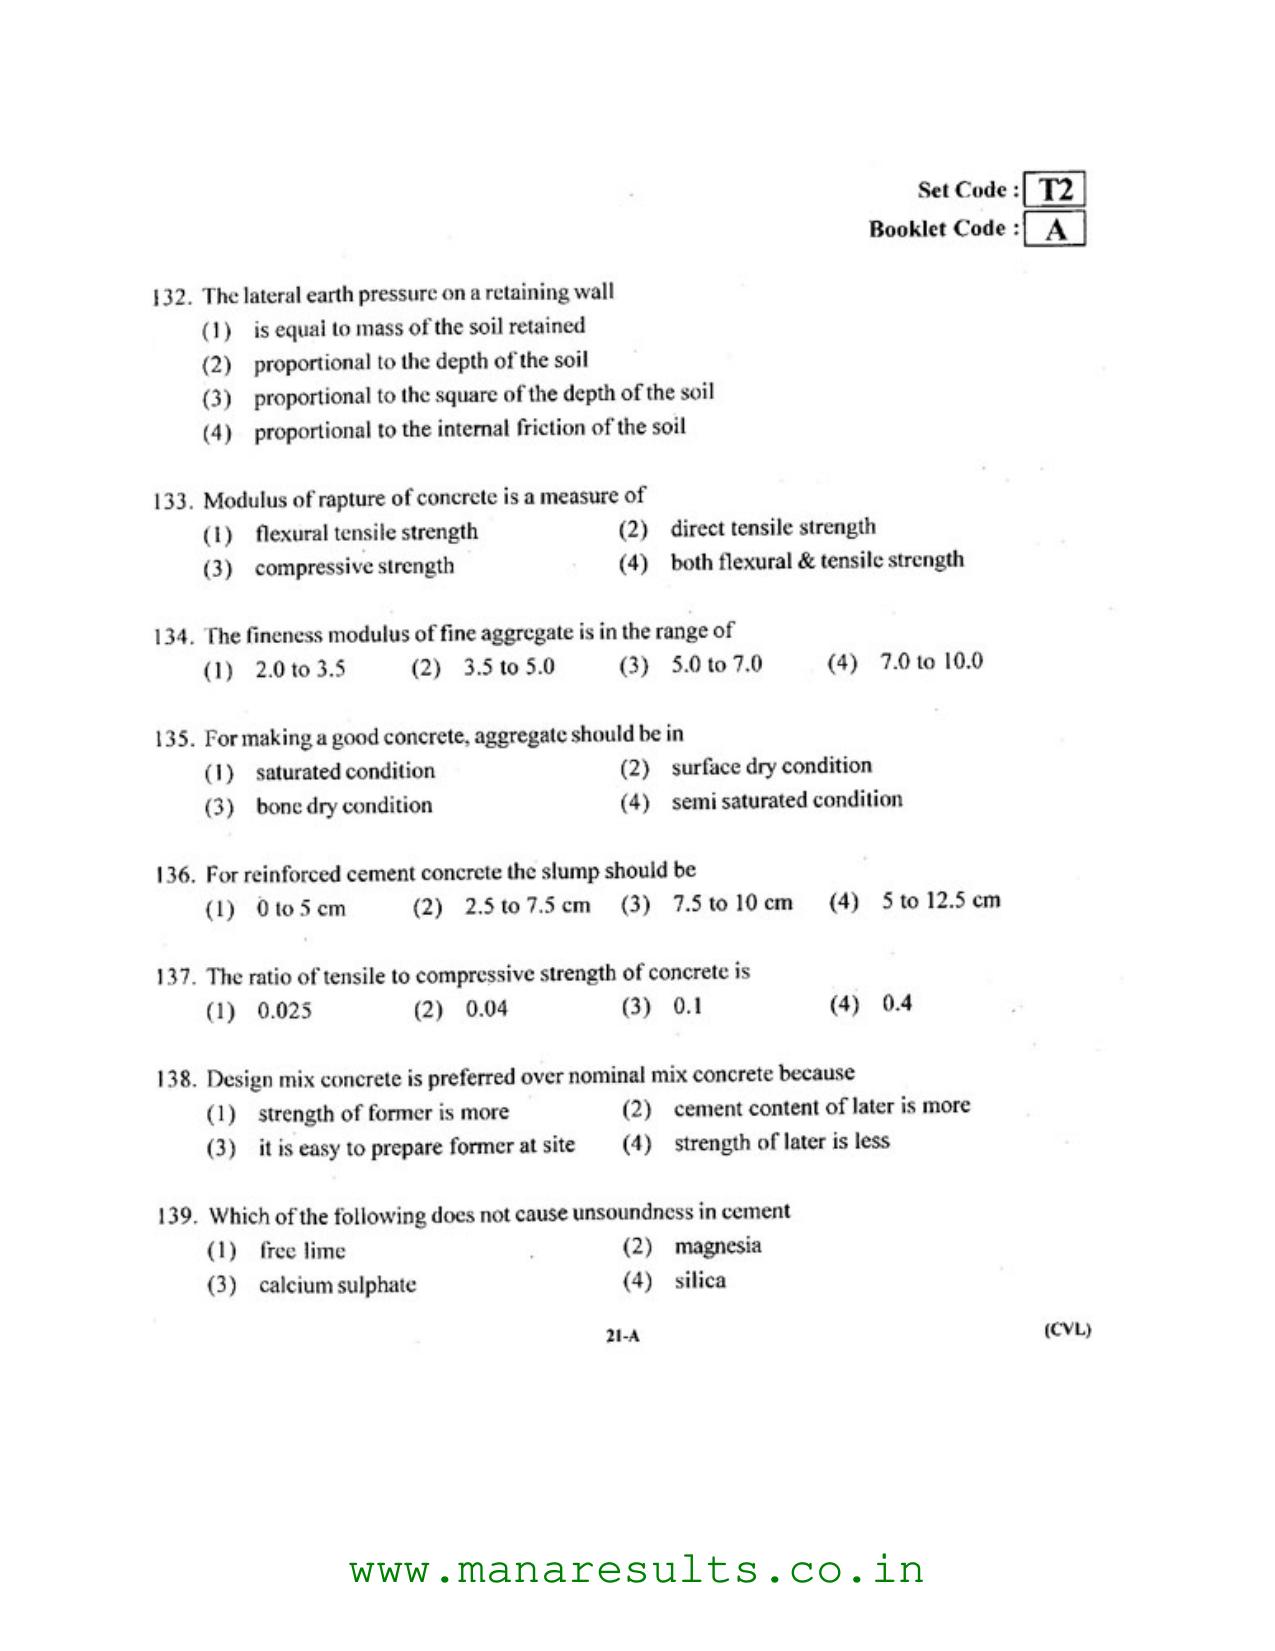 AP ECET 2016 Civil Engineering Old Previous Question Papers - Page 20